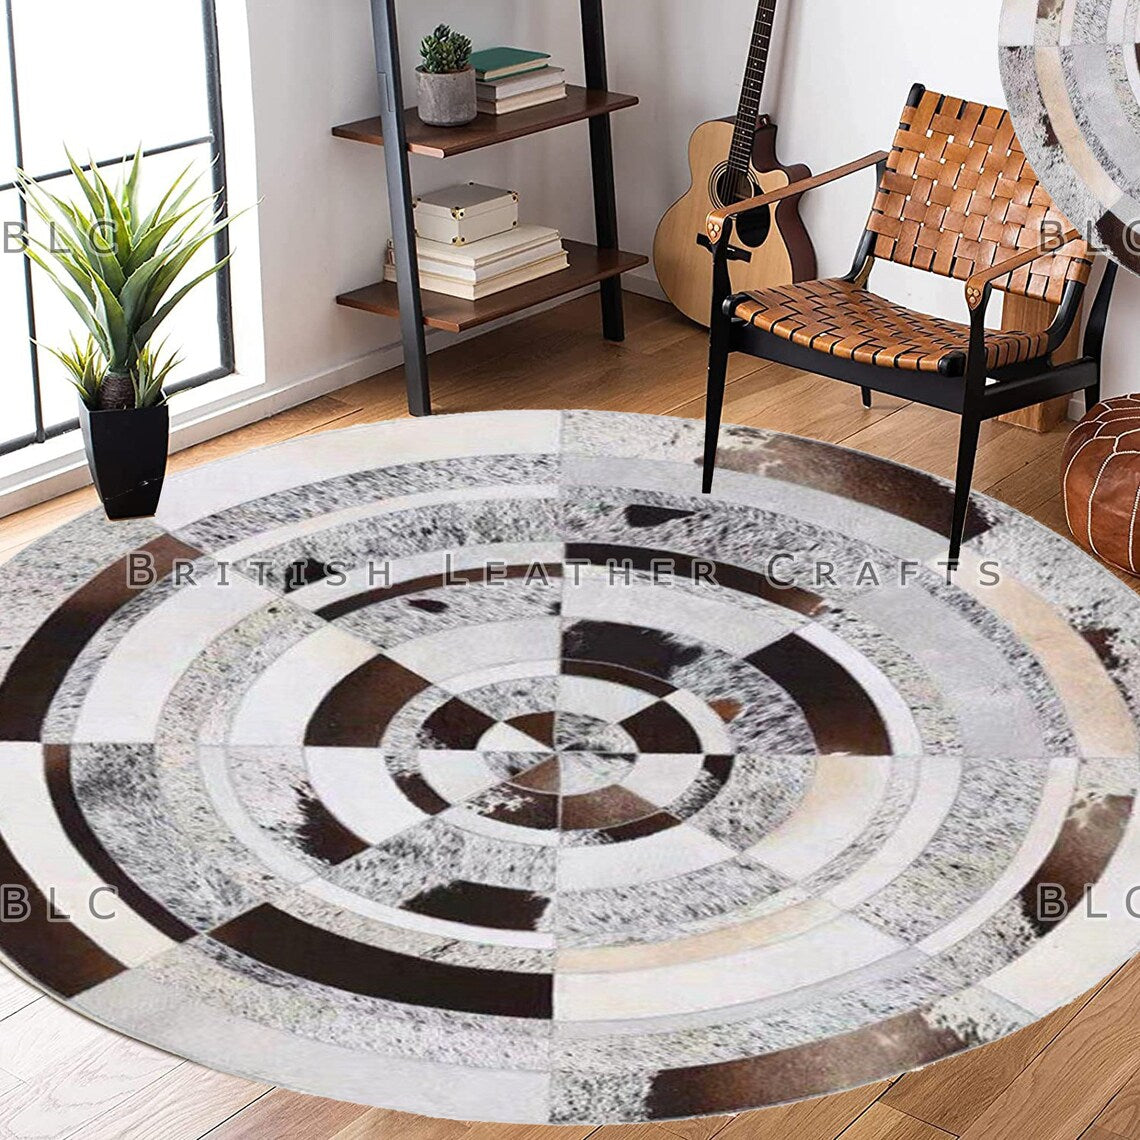 Cowhide Patchwork Area Rug - 100% Natural Hair on Leather Carpet - Cow Hide Leather Home Décor Rug (BLCPR109)